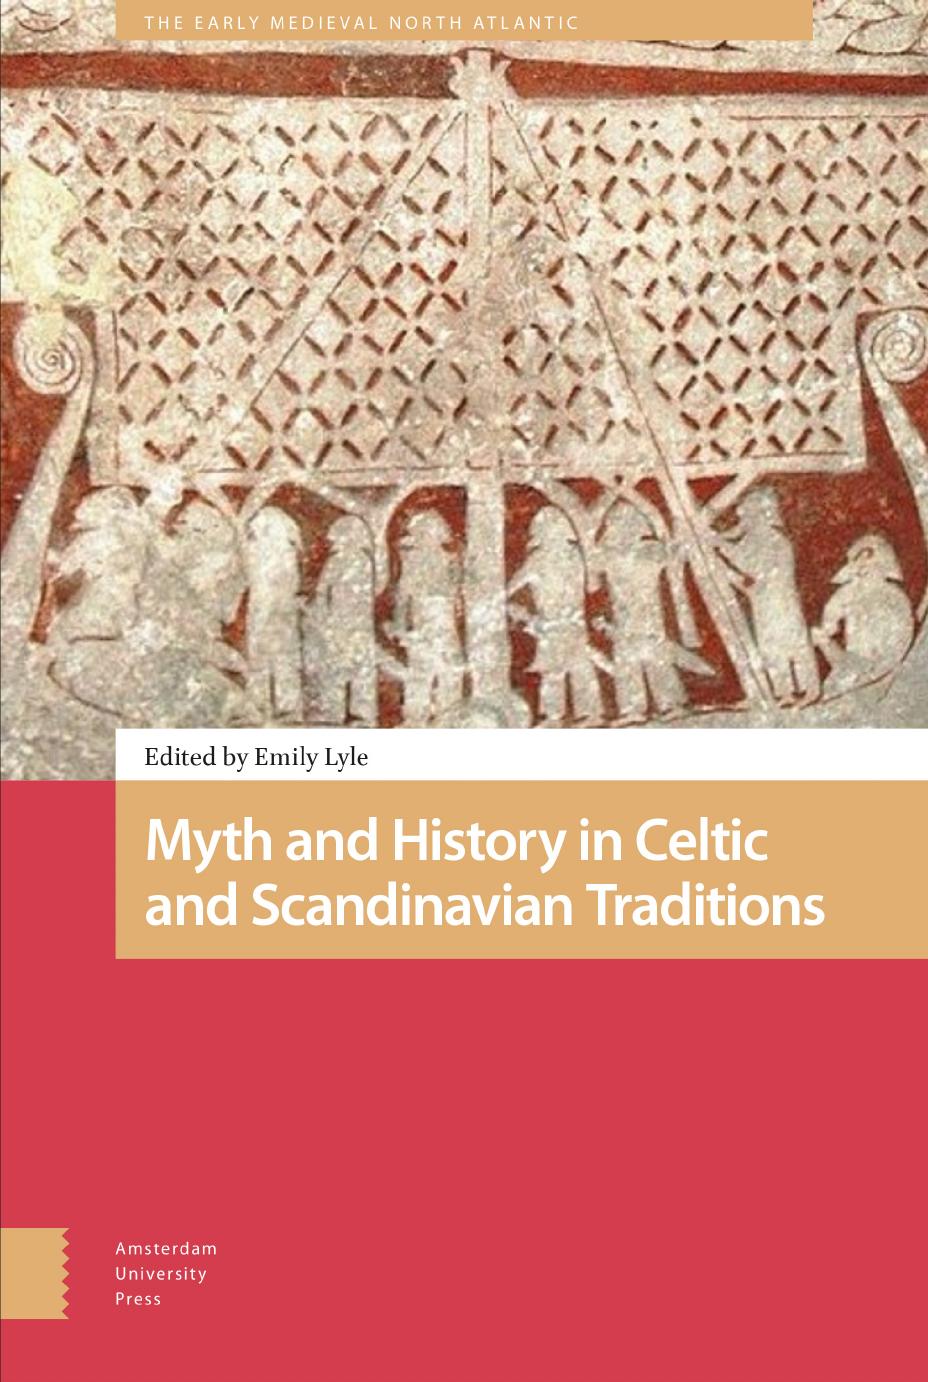 Myth and History in Celtic and Scandinavian Traditions by Emily Lyle (ed.)